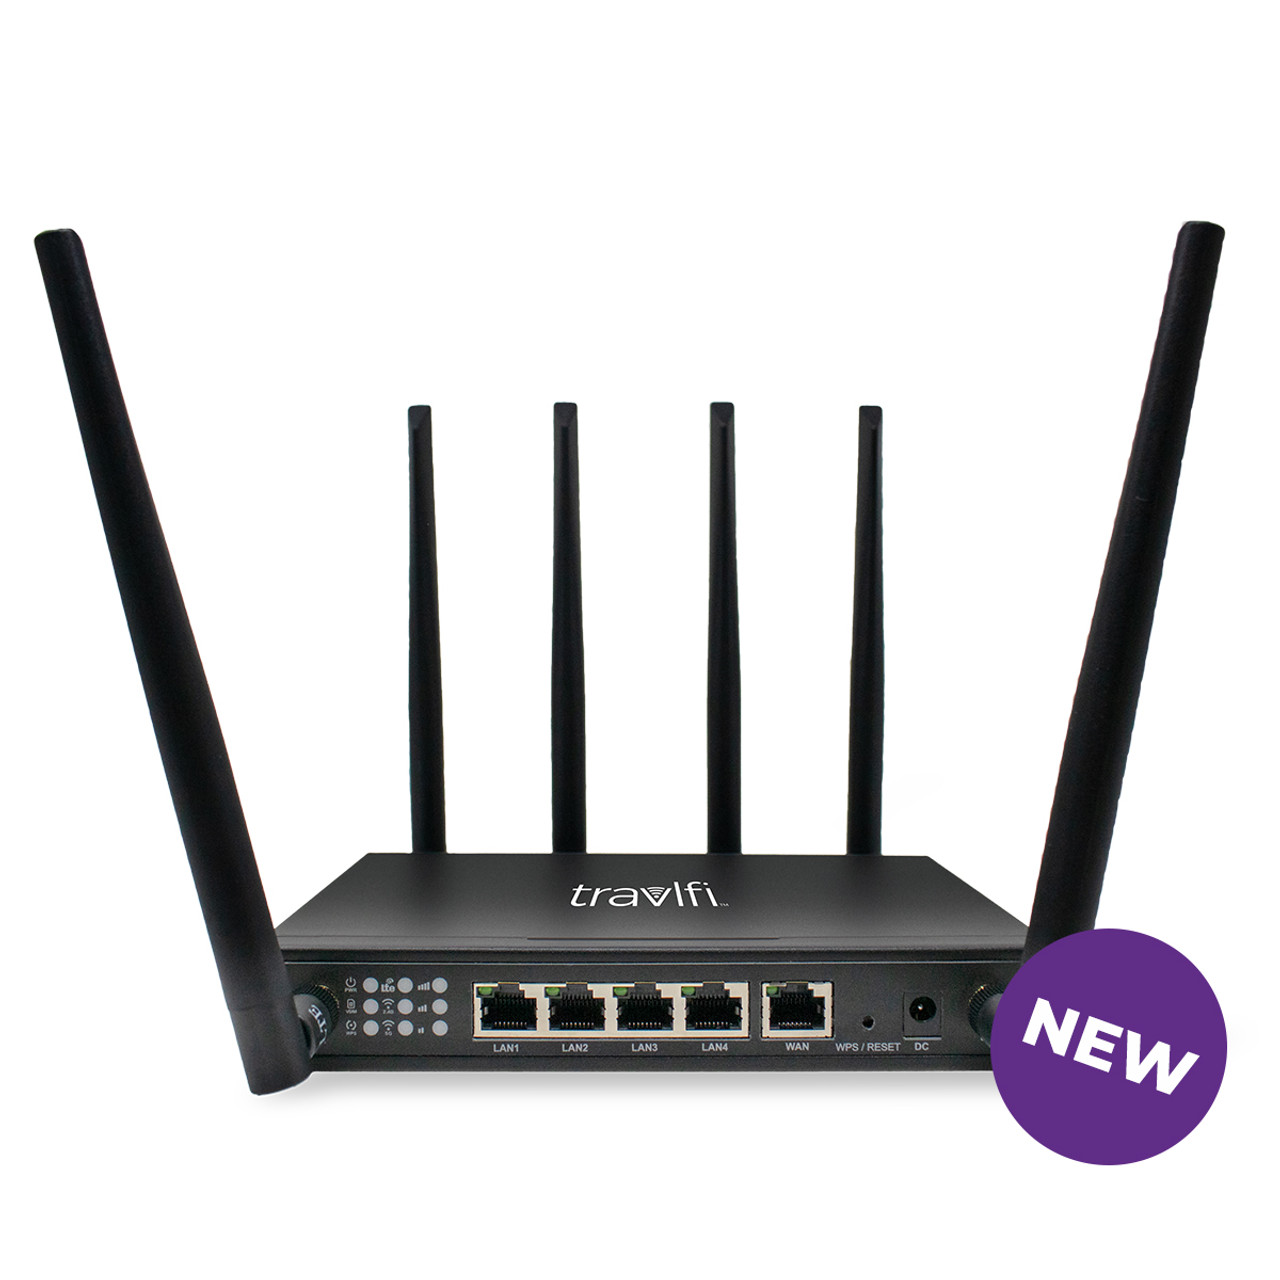 4G LTE WiFi Sim Router with 12dbi 